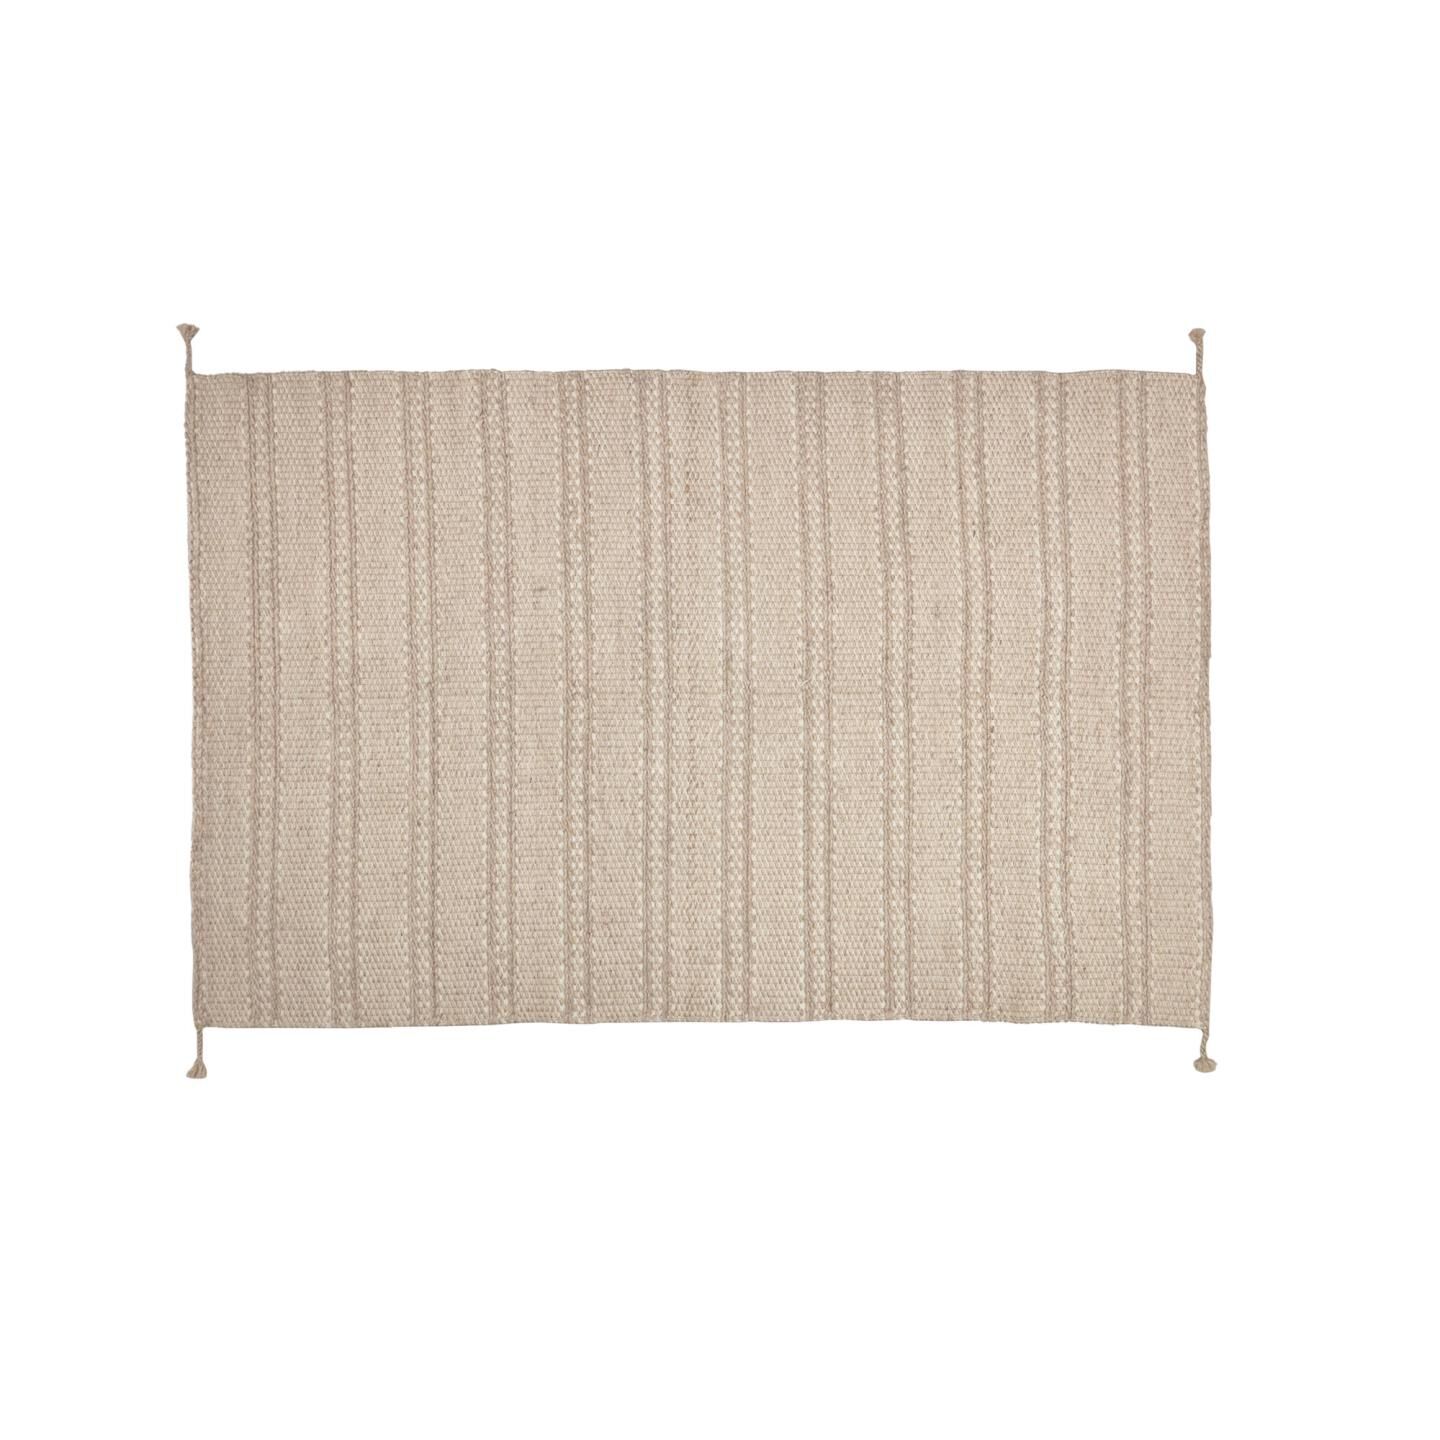 Kave Home Tappeto Kaie beige 100% PET 160 x 230 cm